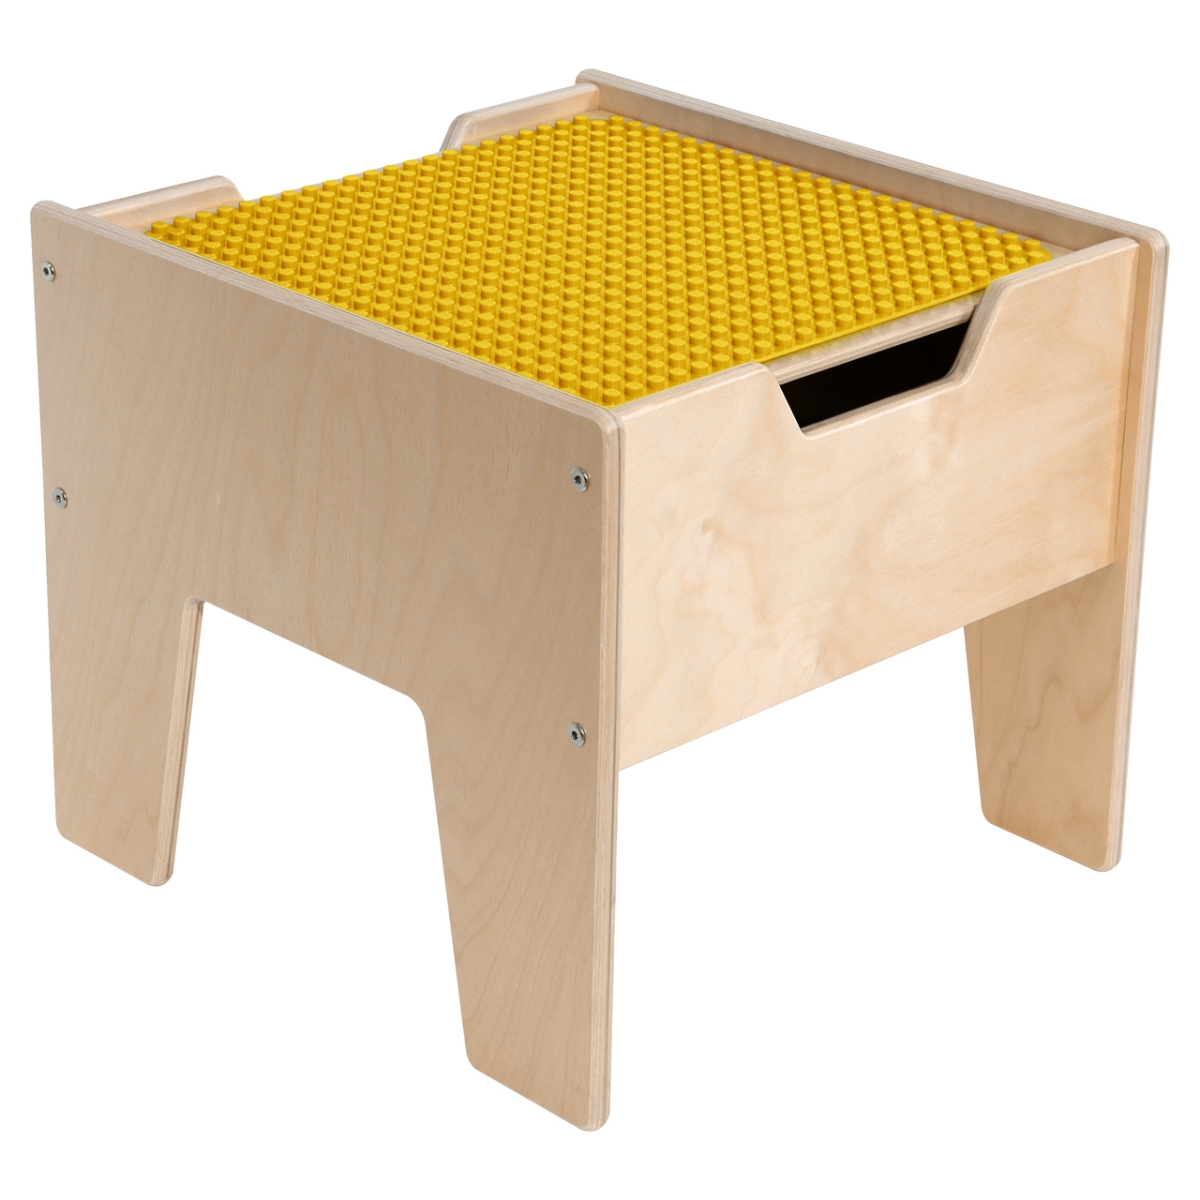 C991300-py 2-n-1 Activity Table With Yellow Duplo Compatible Top - Rta